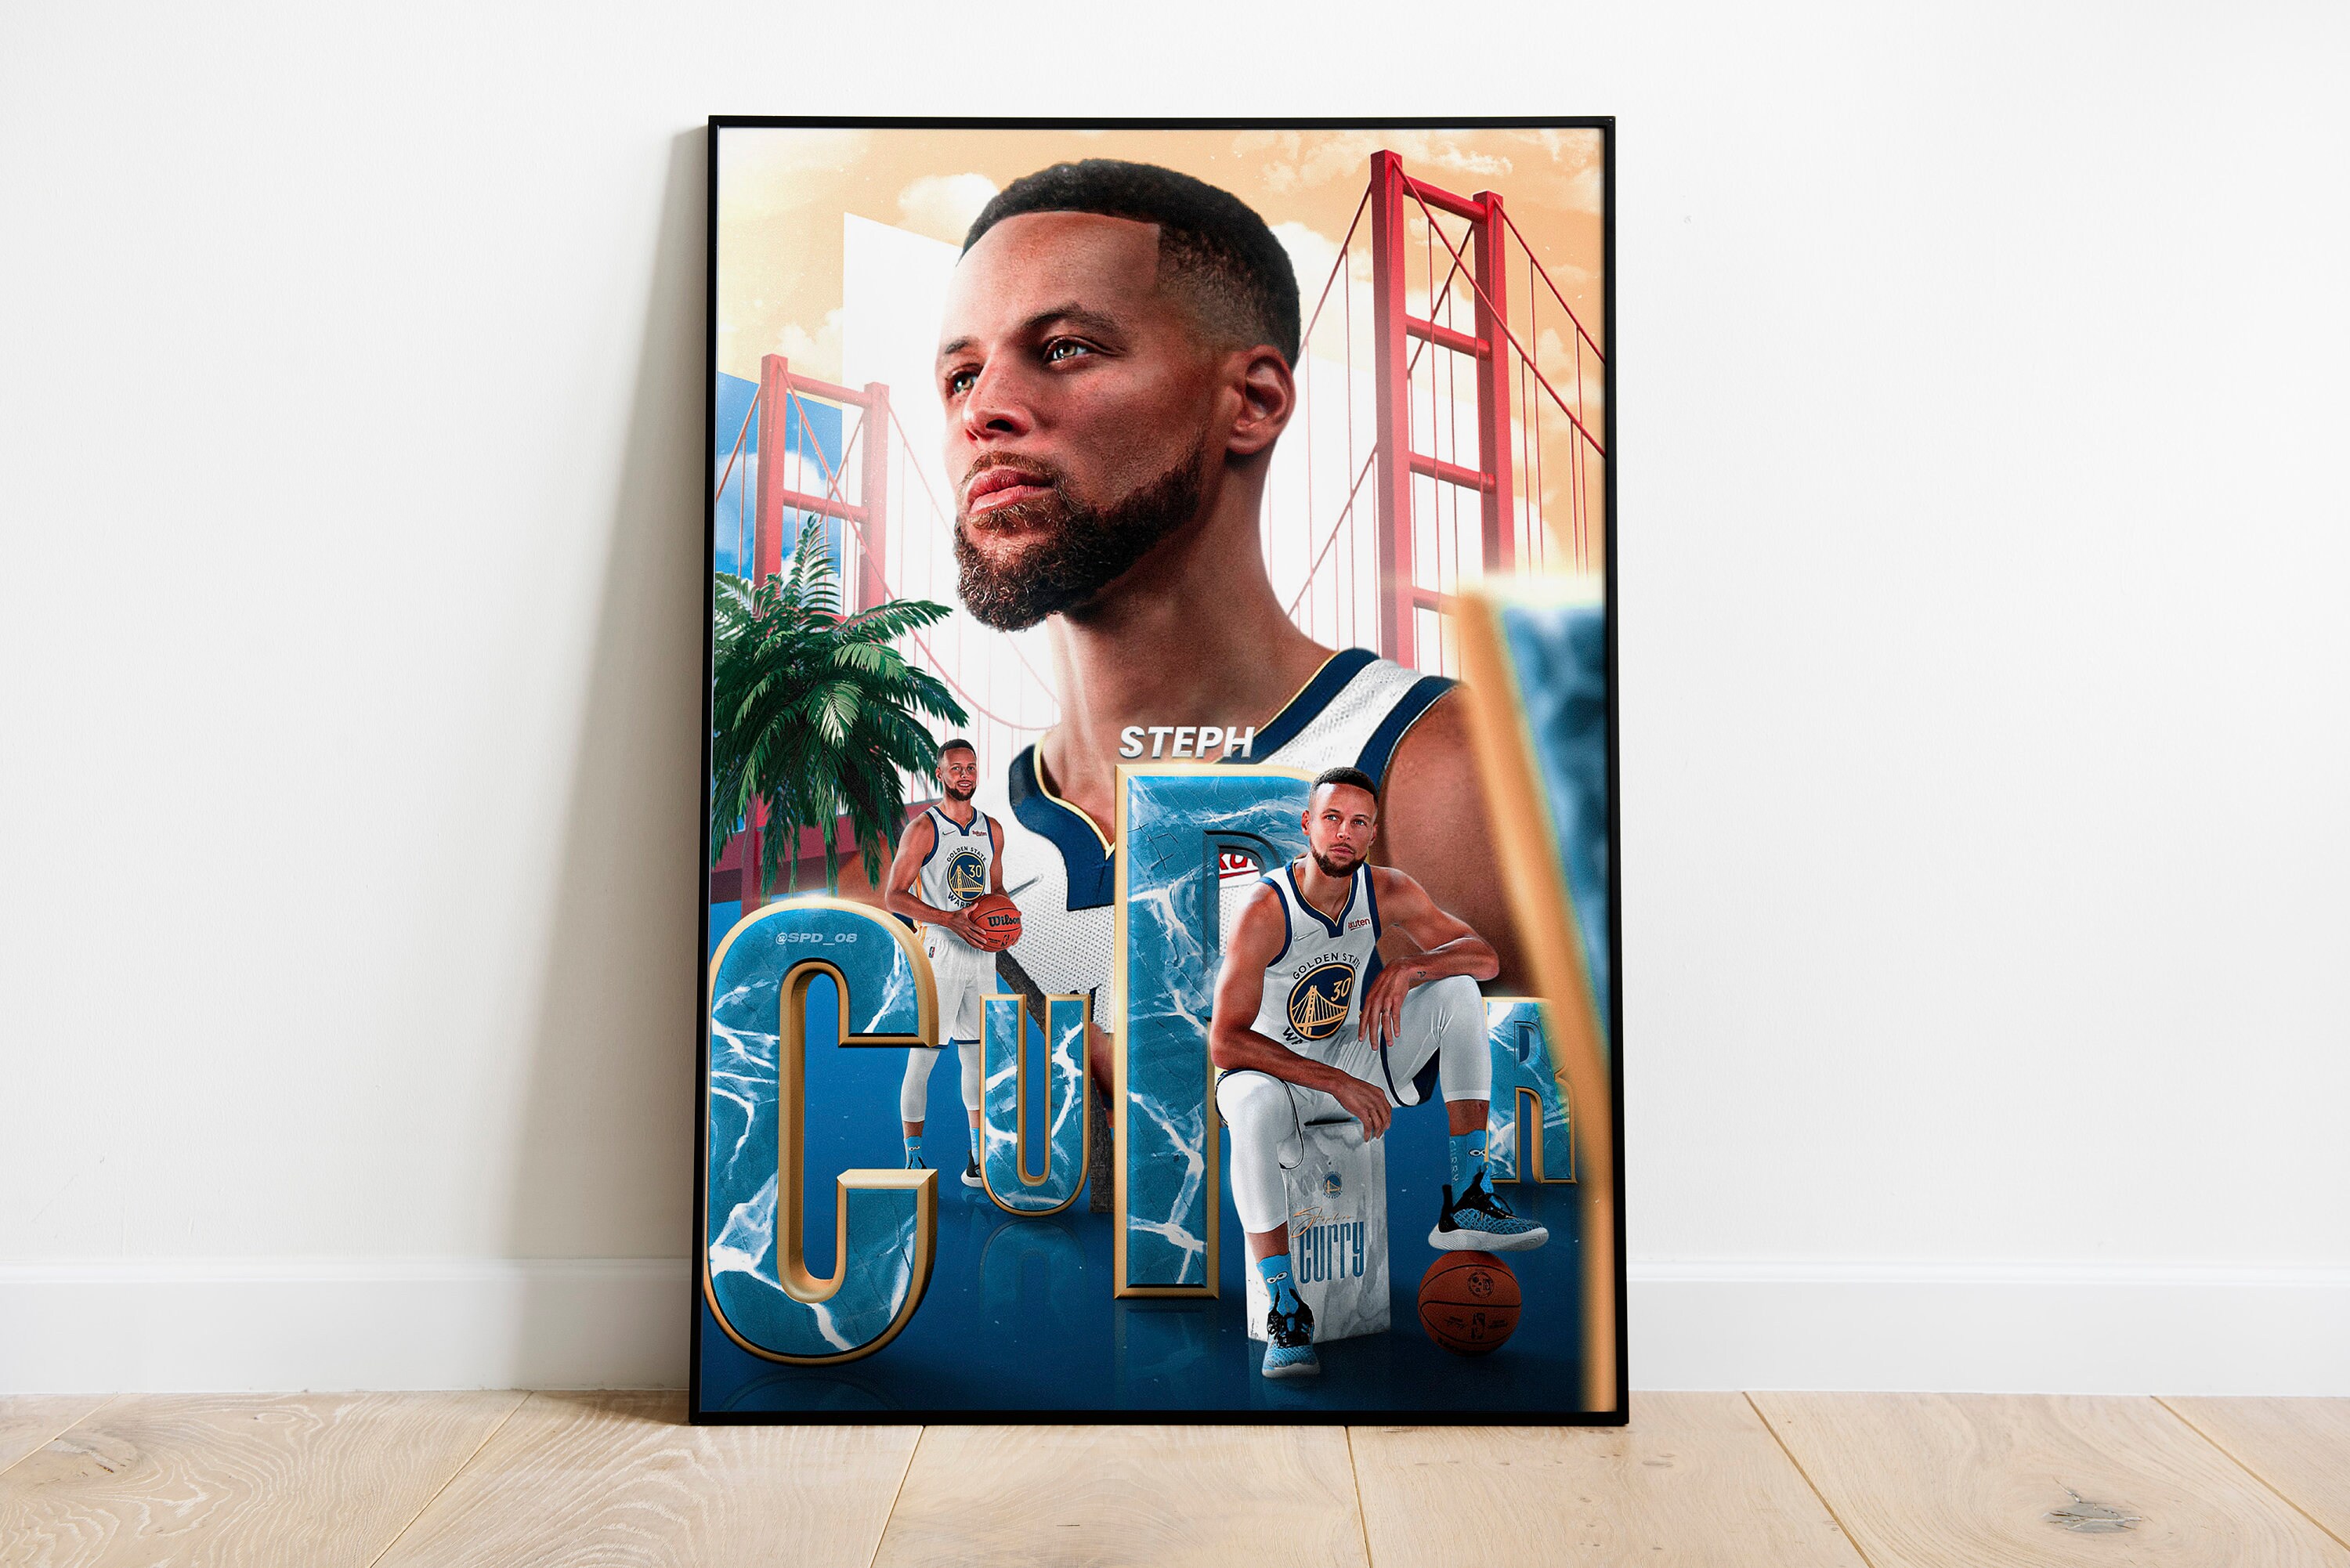 Stephen Curry Poster, NBA Posters, Wall Art, Wall Decor, 12x18 20x30 24x36 Premium Matte Vertical Posters, Golden State Warriors, 4K Quality